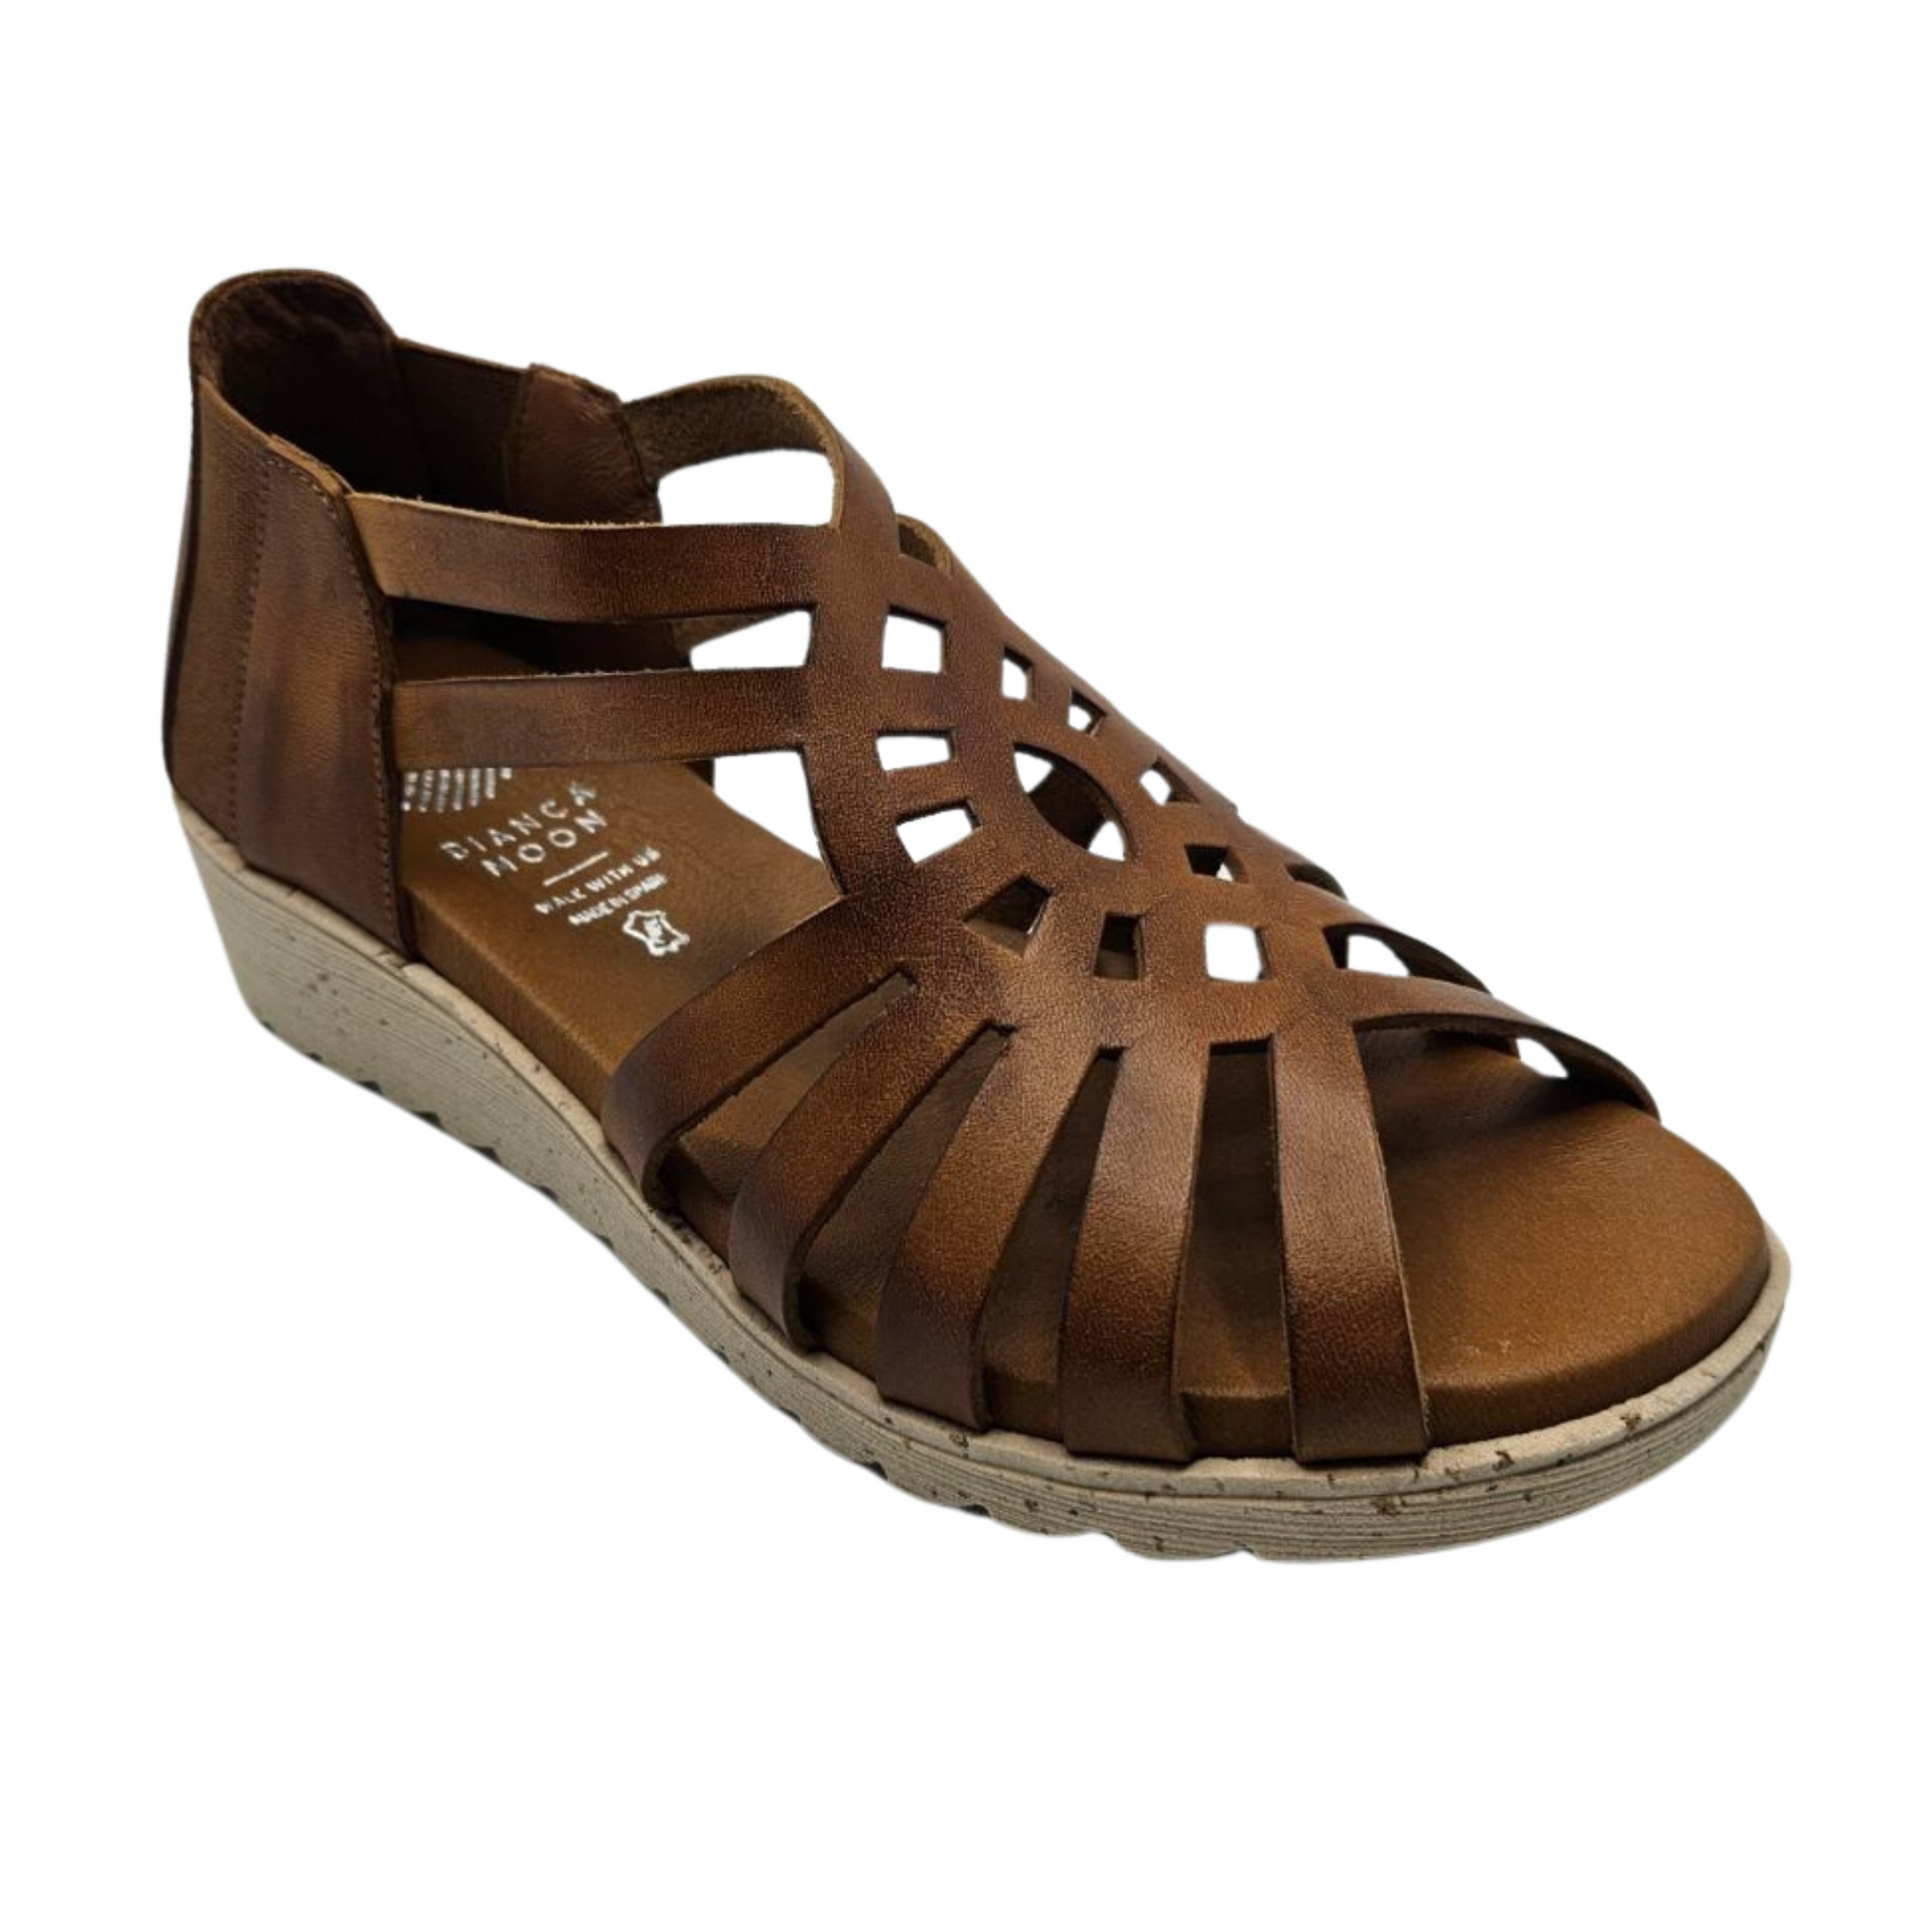 45 degree angled view of tan leather sandal with slight wedge heel and cutout design on upper.